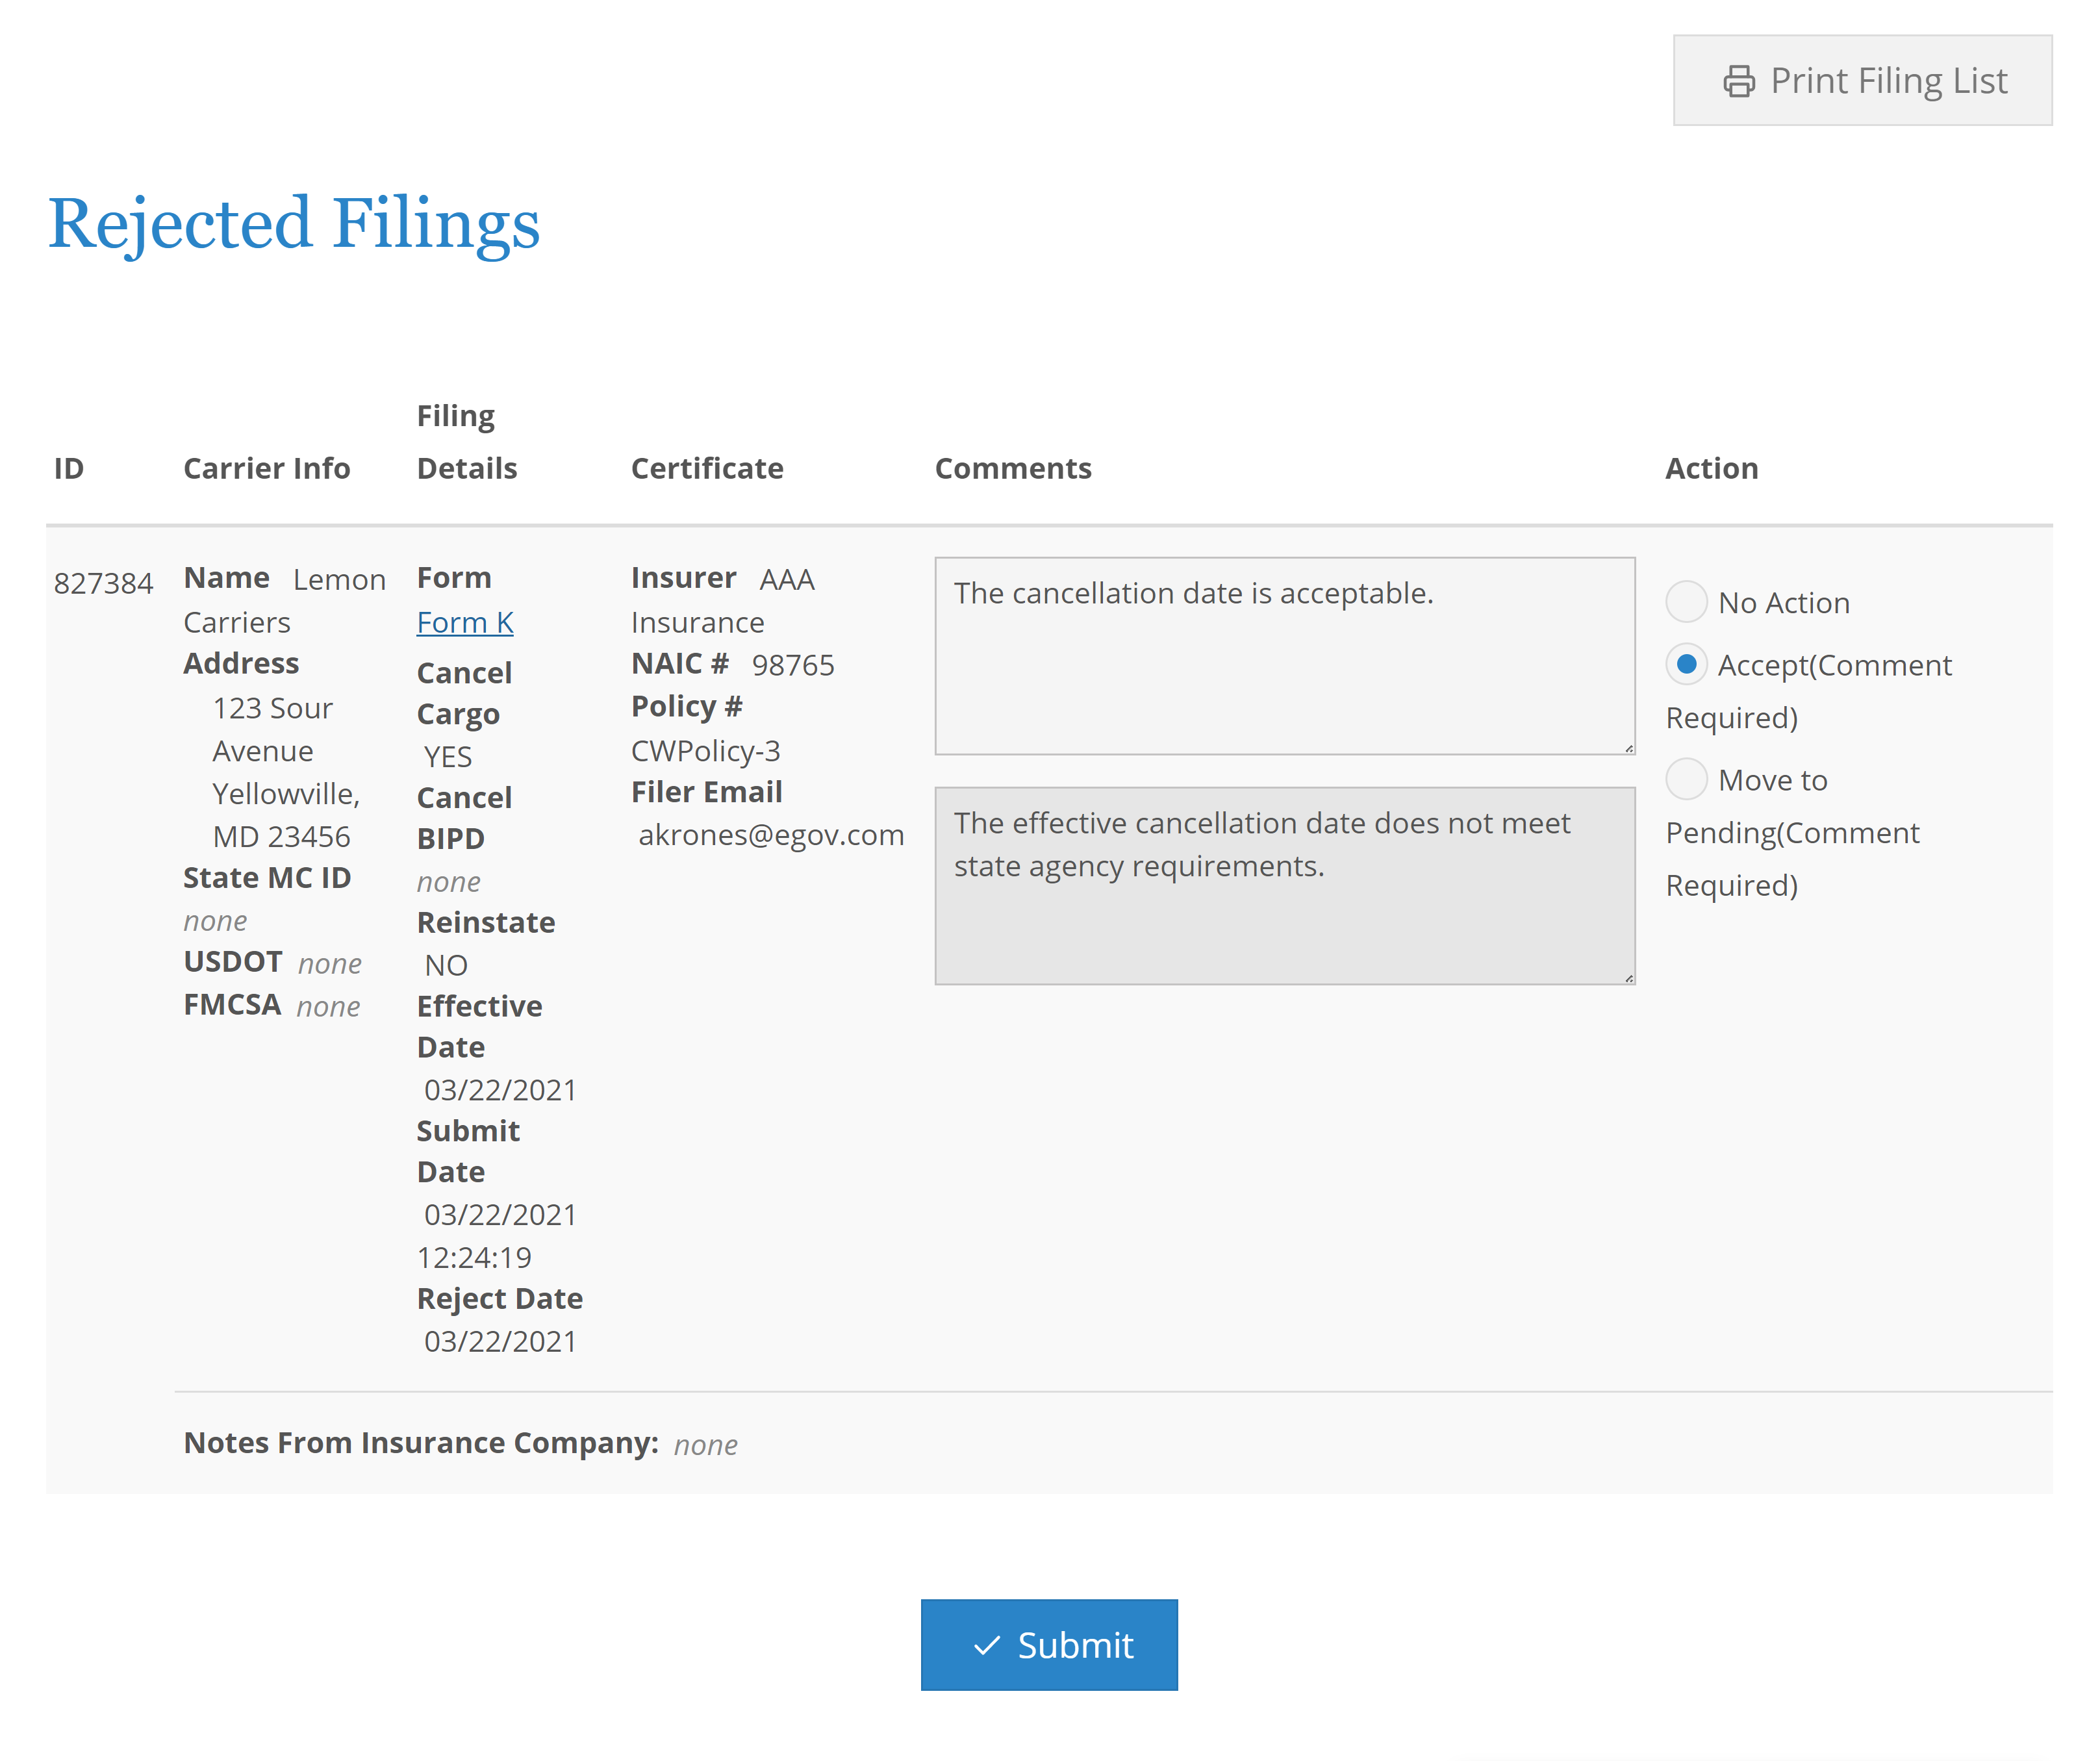 Screenshot of interface for Rejected Filings Search Results List.